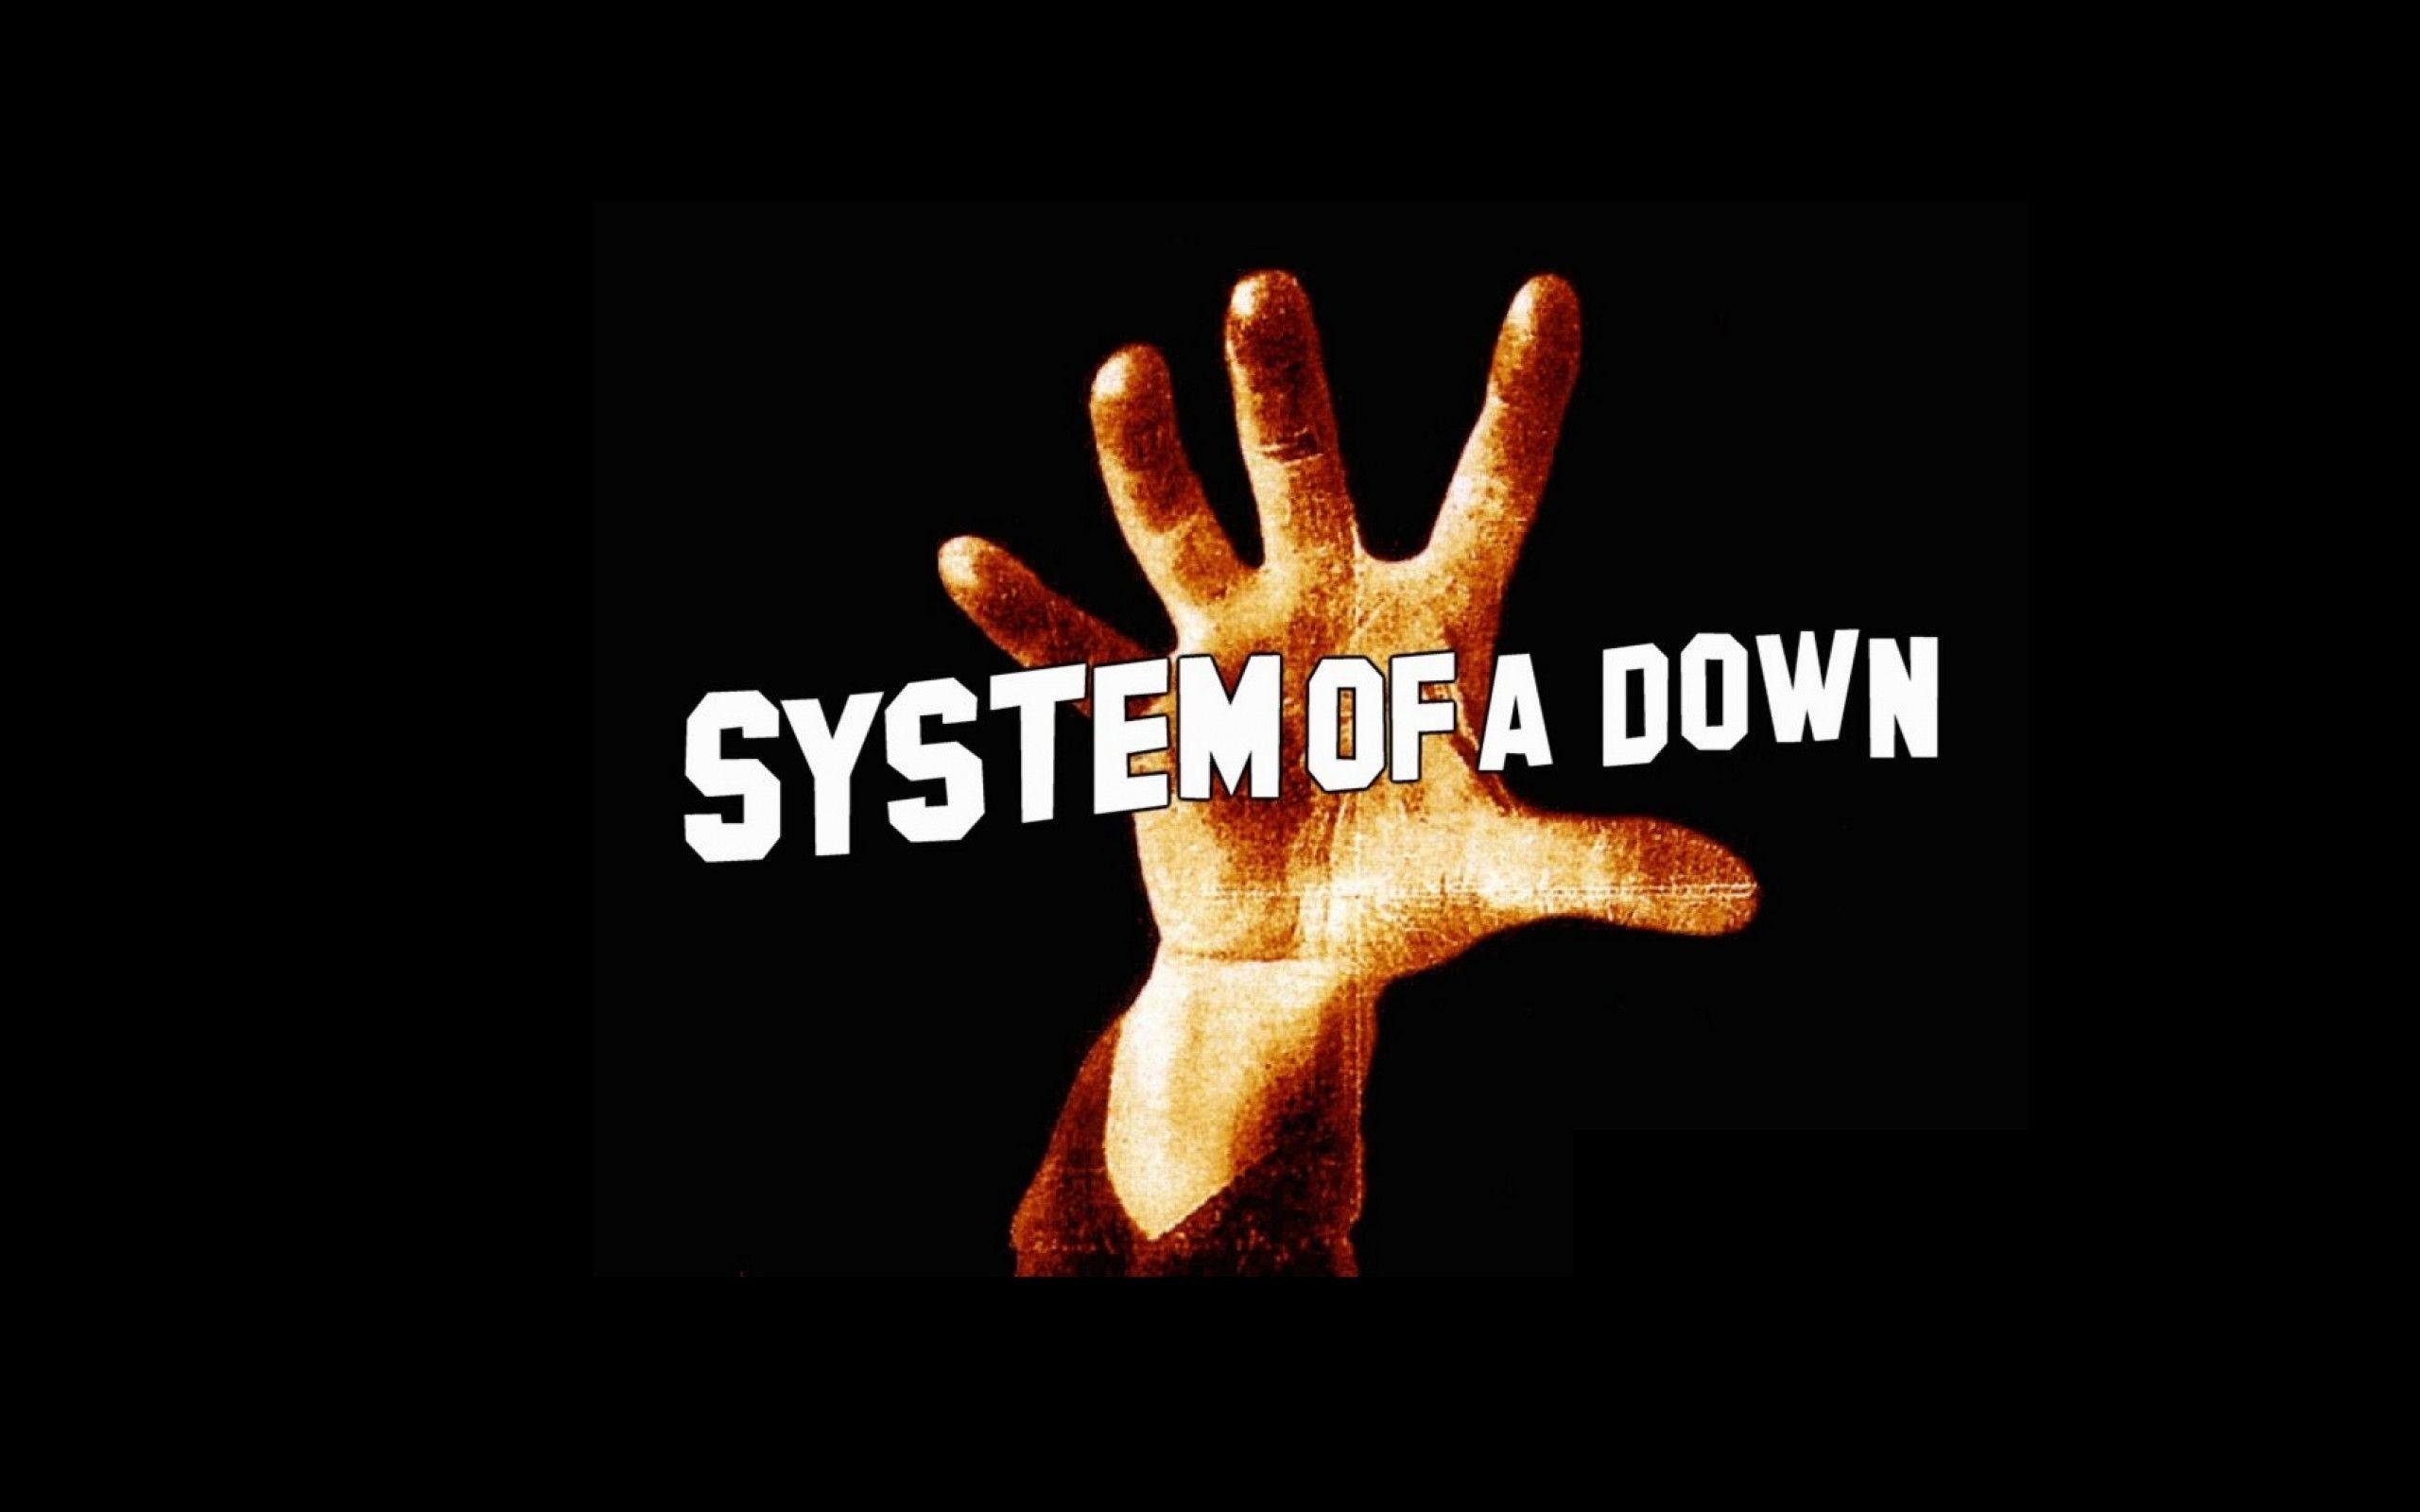 System of a Down Logo - System Of A Down Wallpaper